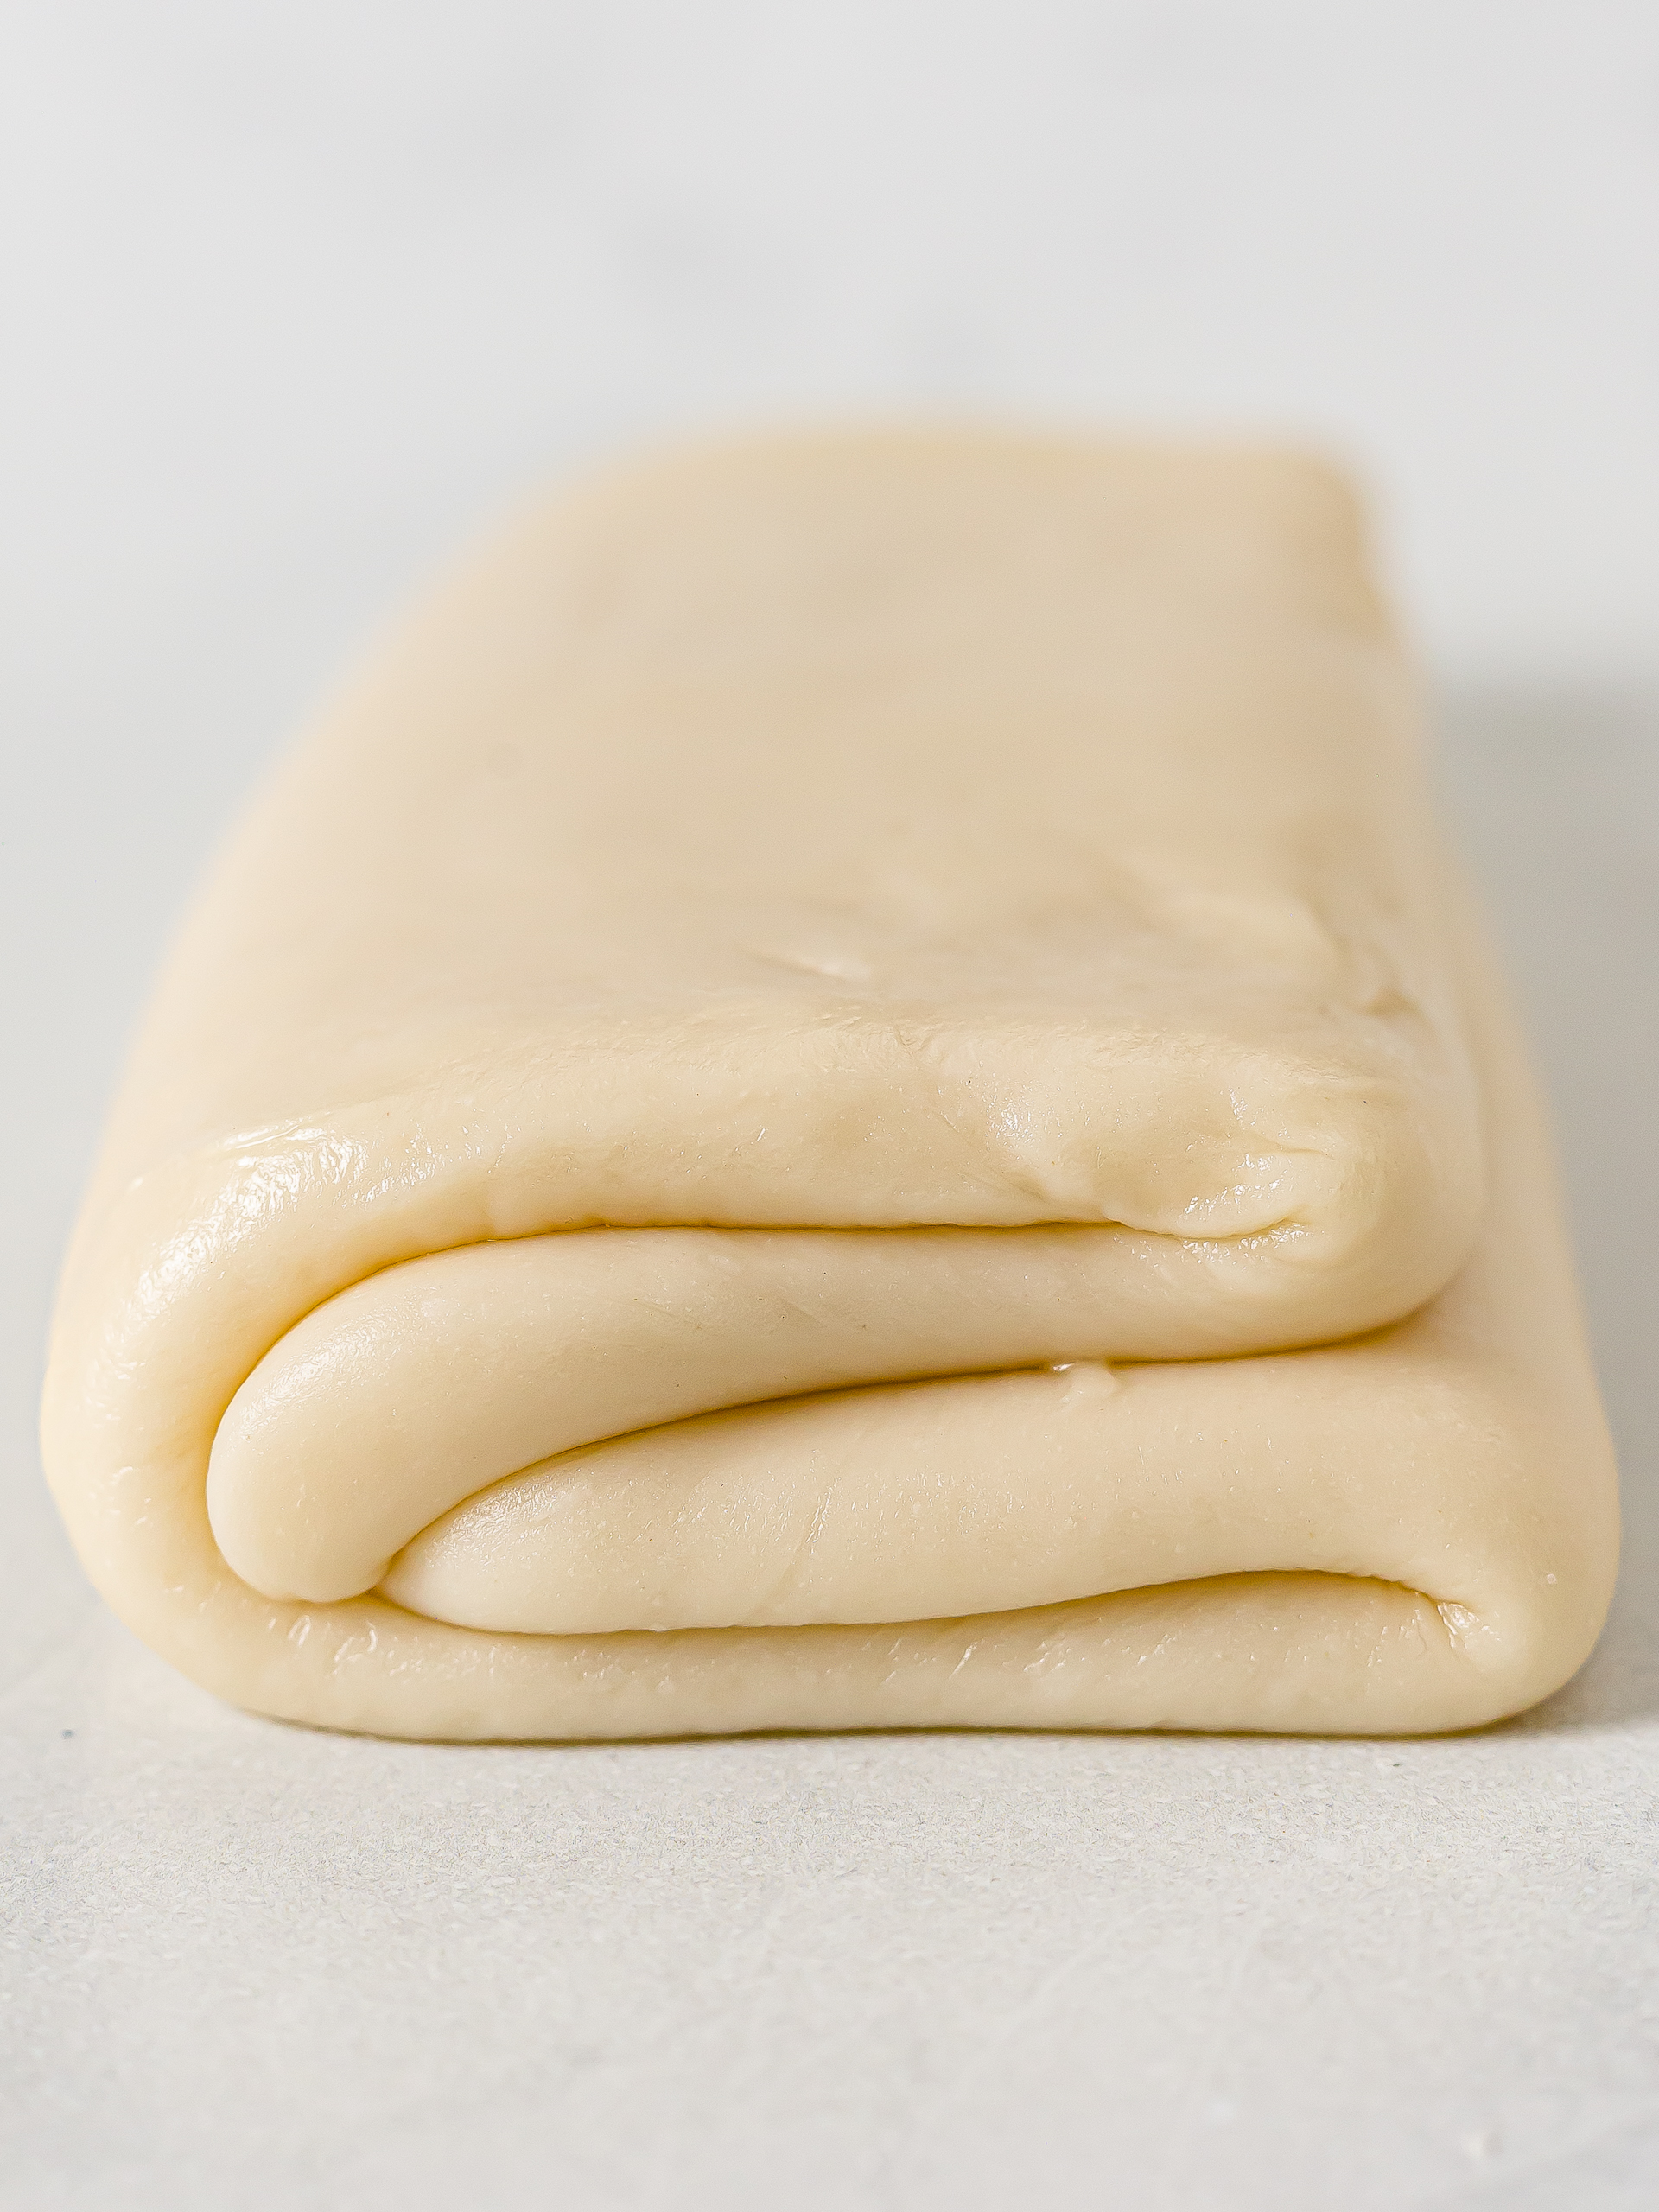 folded pastry dough close up